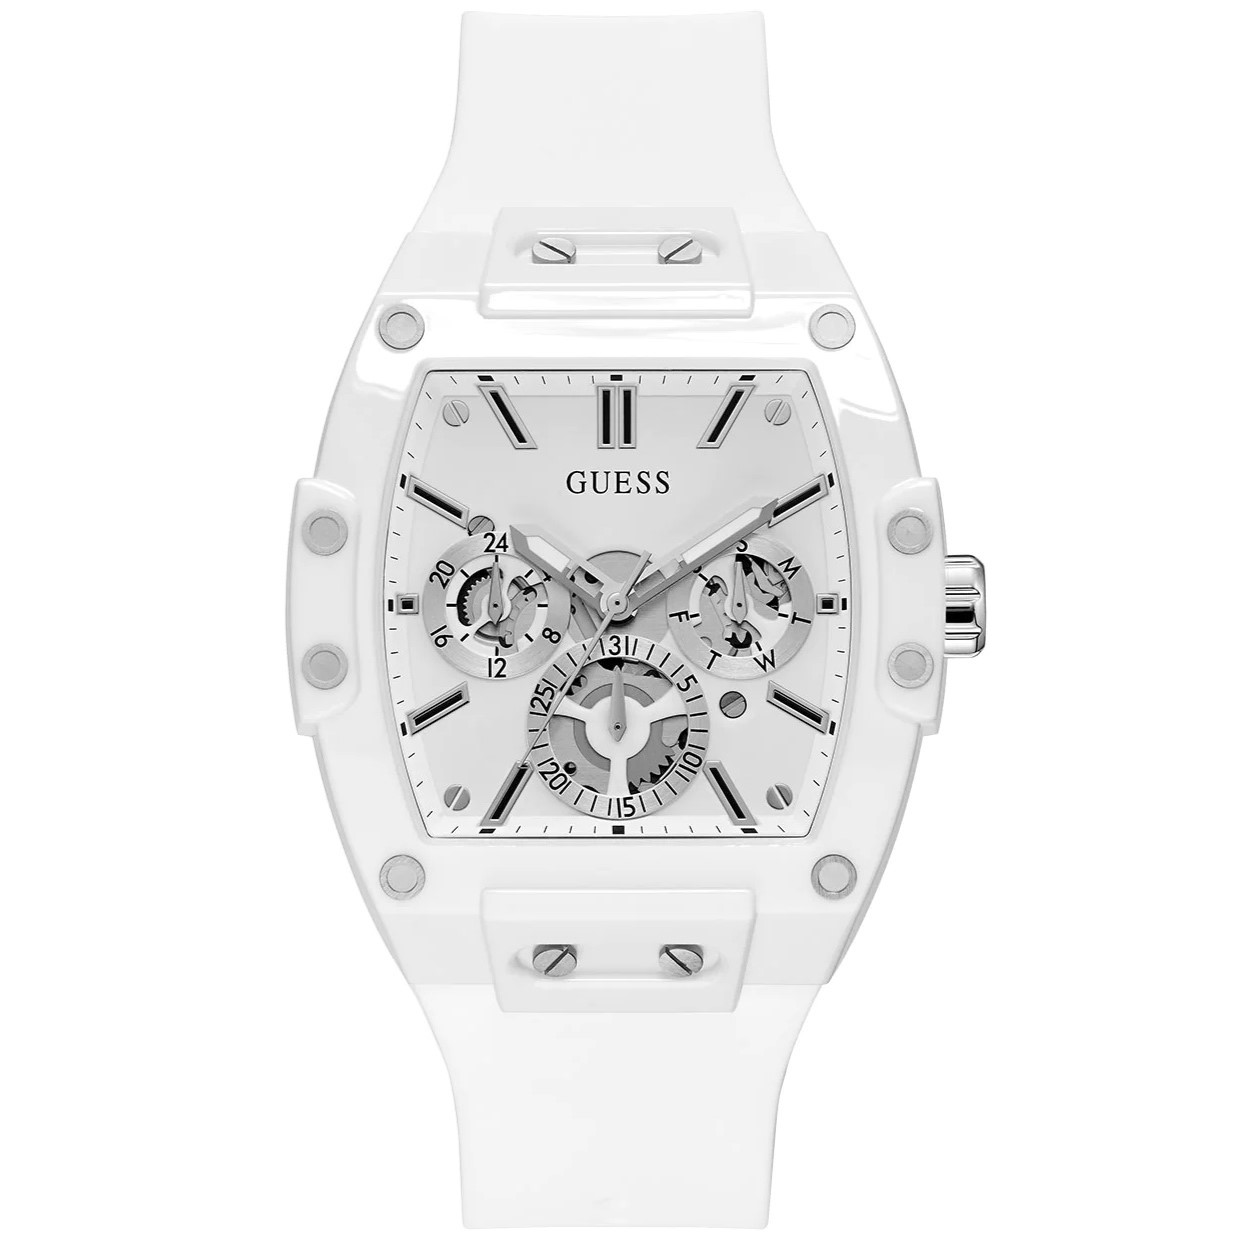 ĐỒNG HỒ NAM GUESS MENS WHITE PHOENIX SILICONE MULTI-FUNCTION WATCH GW0203G2 5